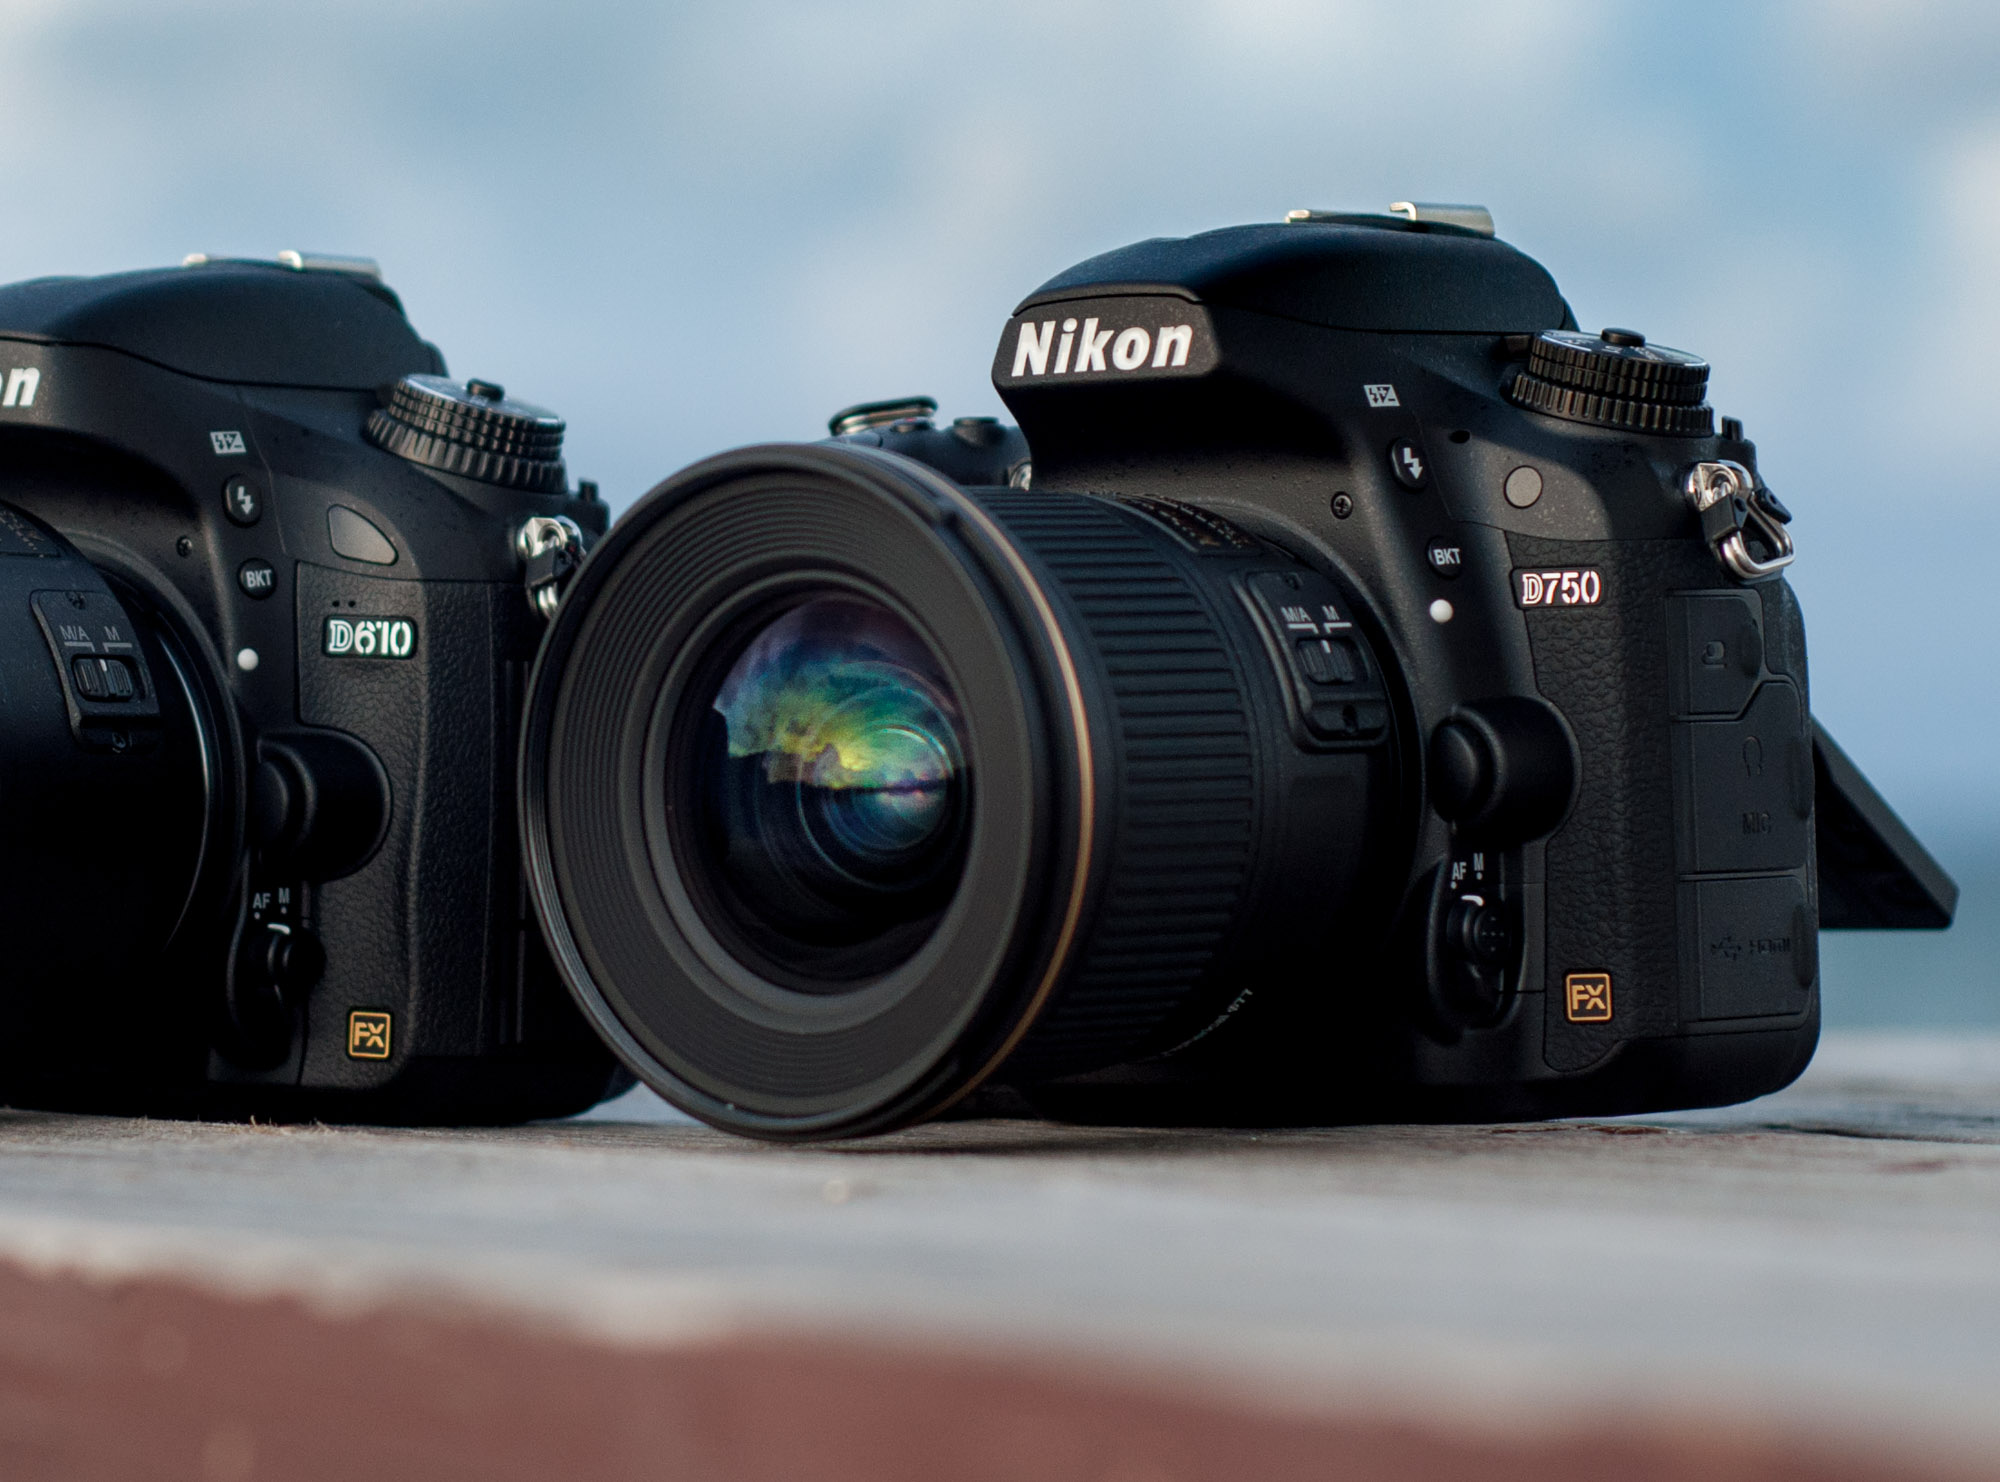 Nikon 24mm f/1.8 G Review | Another Nearly Perfect F/1.8 G Prime?